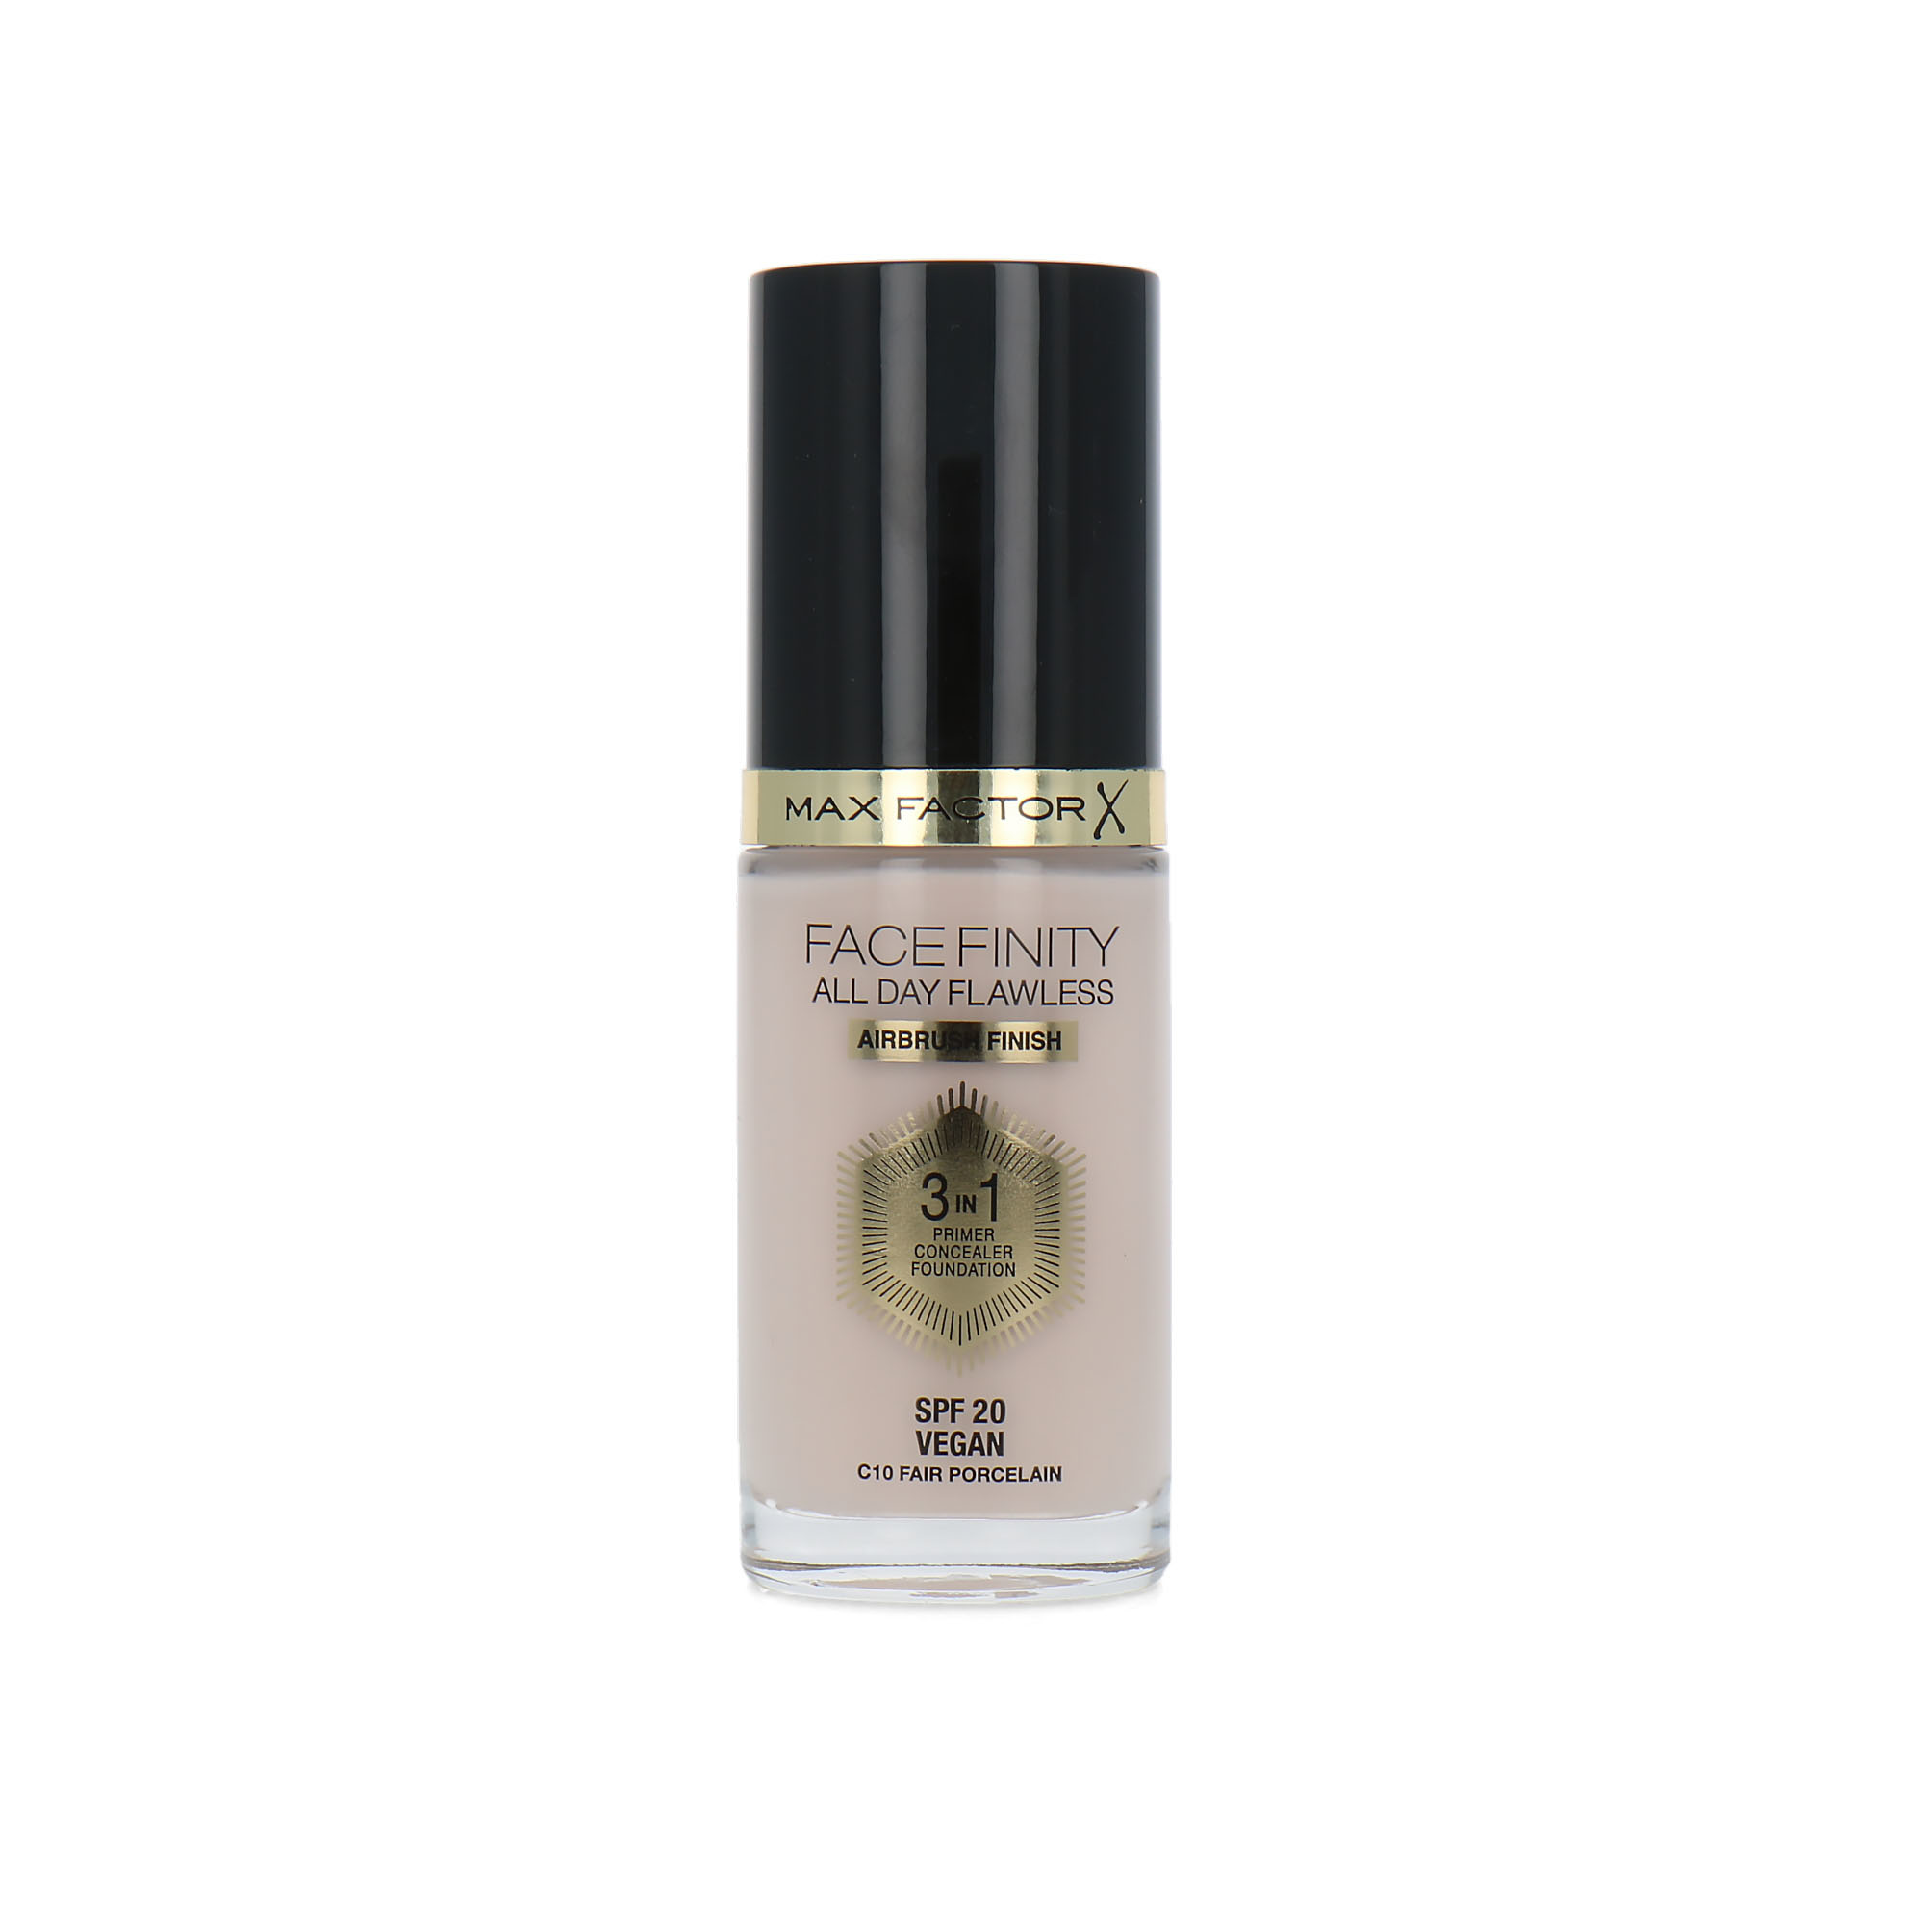 Max Factor Facefinity All Day Flawless 3 in 1 Airbrush Finish Fond de teint - C10 Fair Porcelain